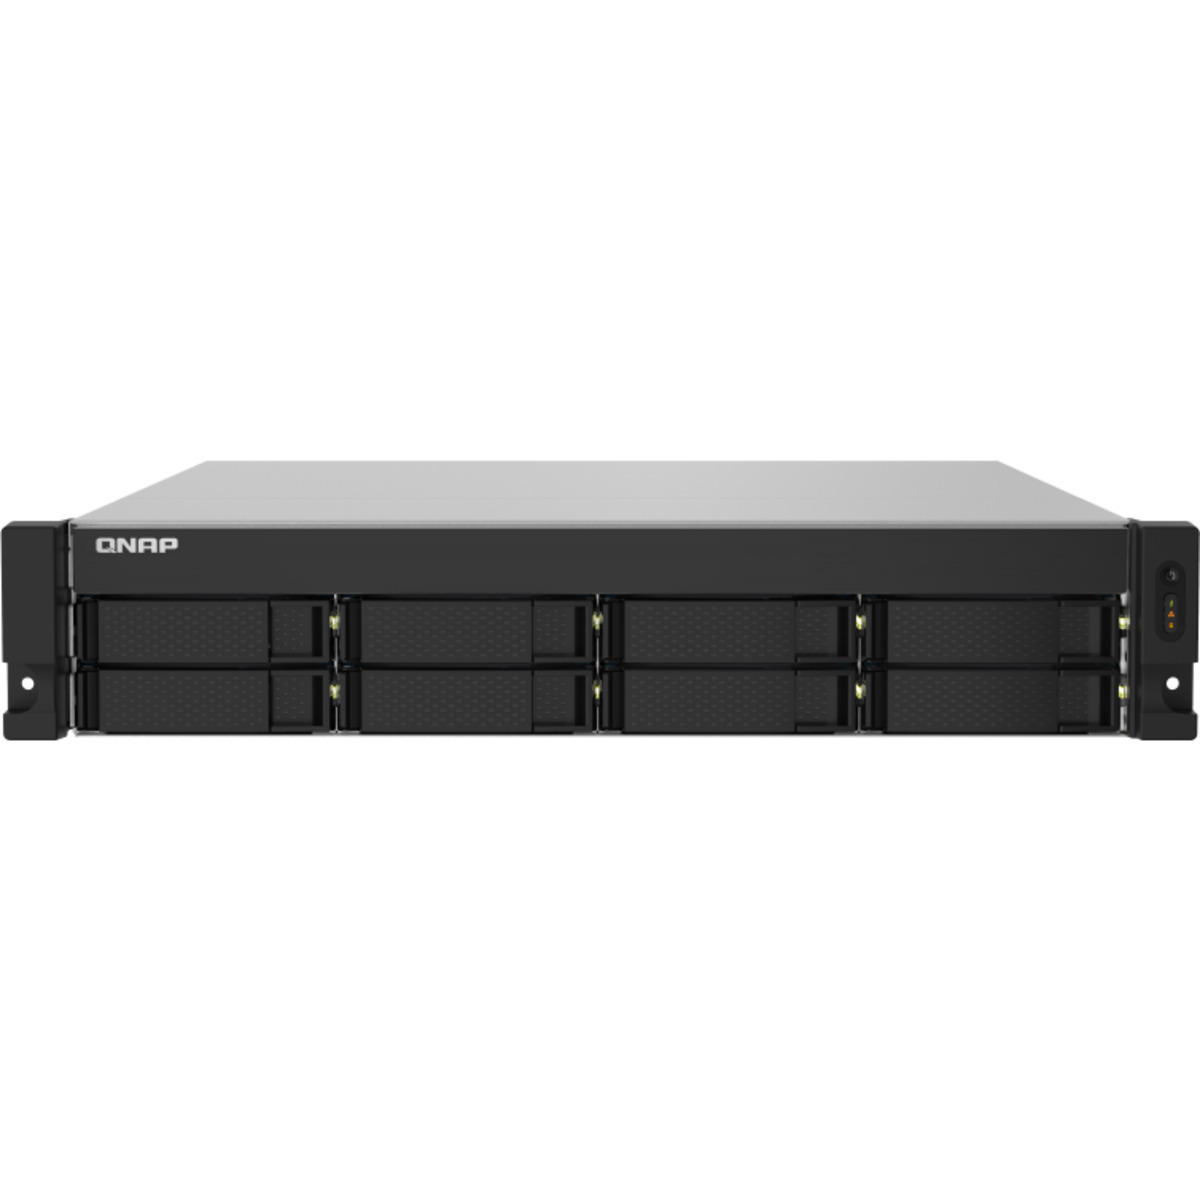 buy QNAP TS-832PXU-RP 8tb RackMount NAS - Network Attached Storage Device 8x1000gb Samsung 870 EVO MZ-77E1T0BAM 2.5 560/530MB/s SATA 6Gb/s SSD CONSUMER Class Drives Installed - Burn-In Tested - FREE RAM UPGRADE - nas headquarters buy network attached storage server device das new raid-5 free shipping usa spring sale TS-832PXU-RP